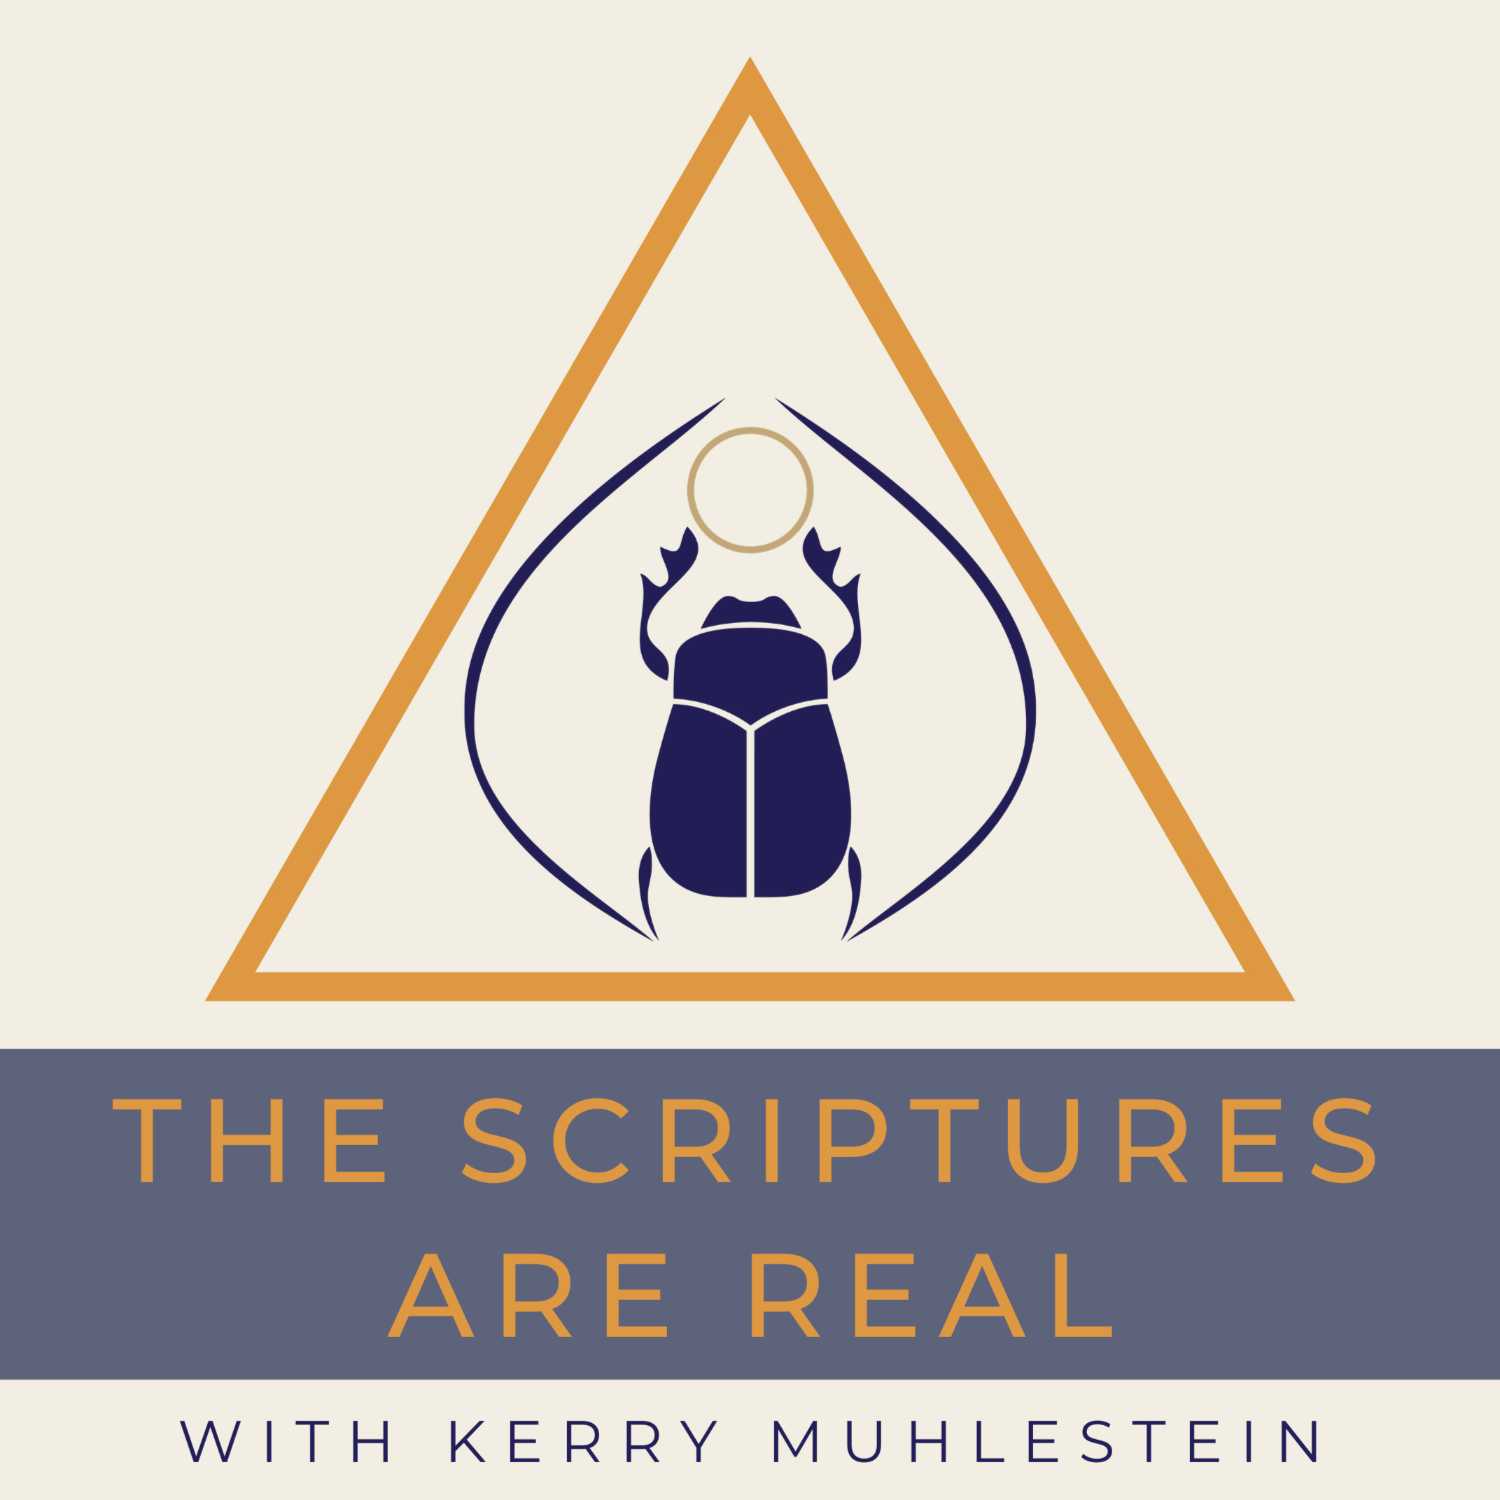 The Temptations of Christ and Prophetic Insights into Our Lives (week of Jan. 30, first to listen to)